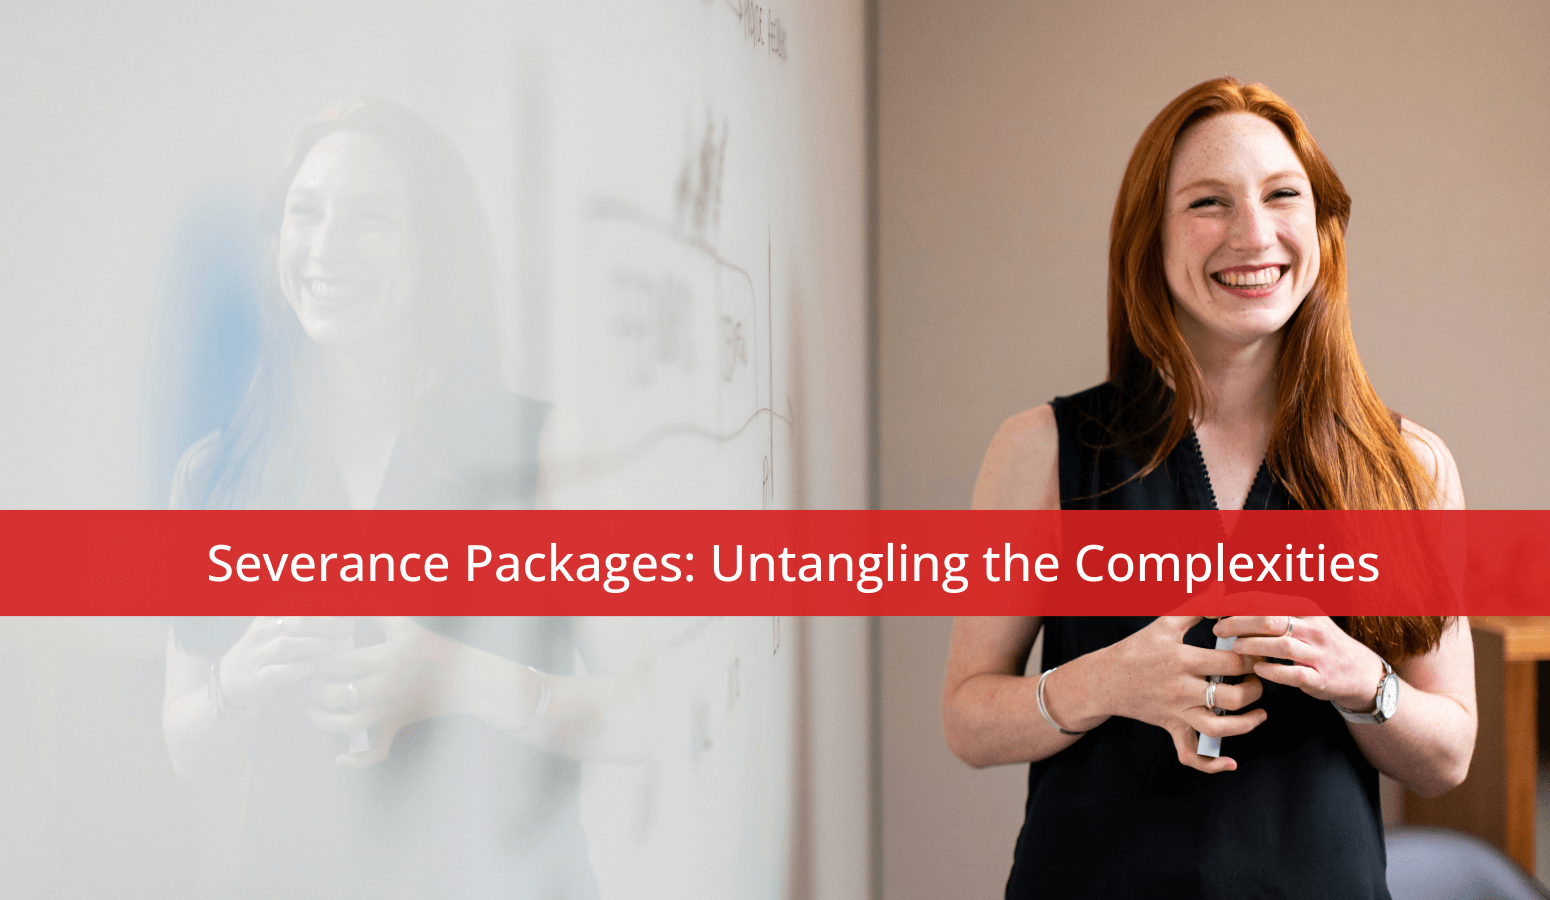 Featured image for “Severance Packages: Untangling the Complexities”